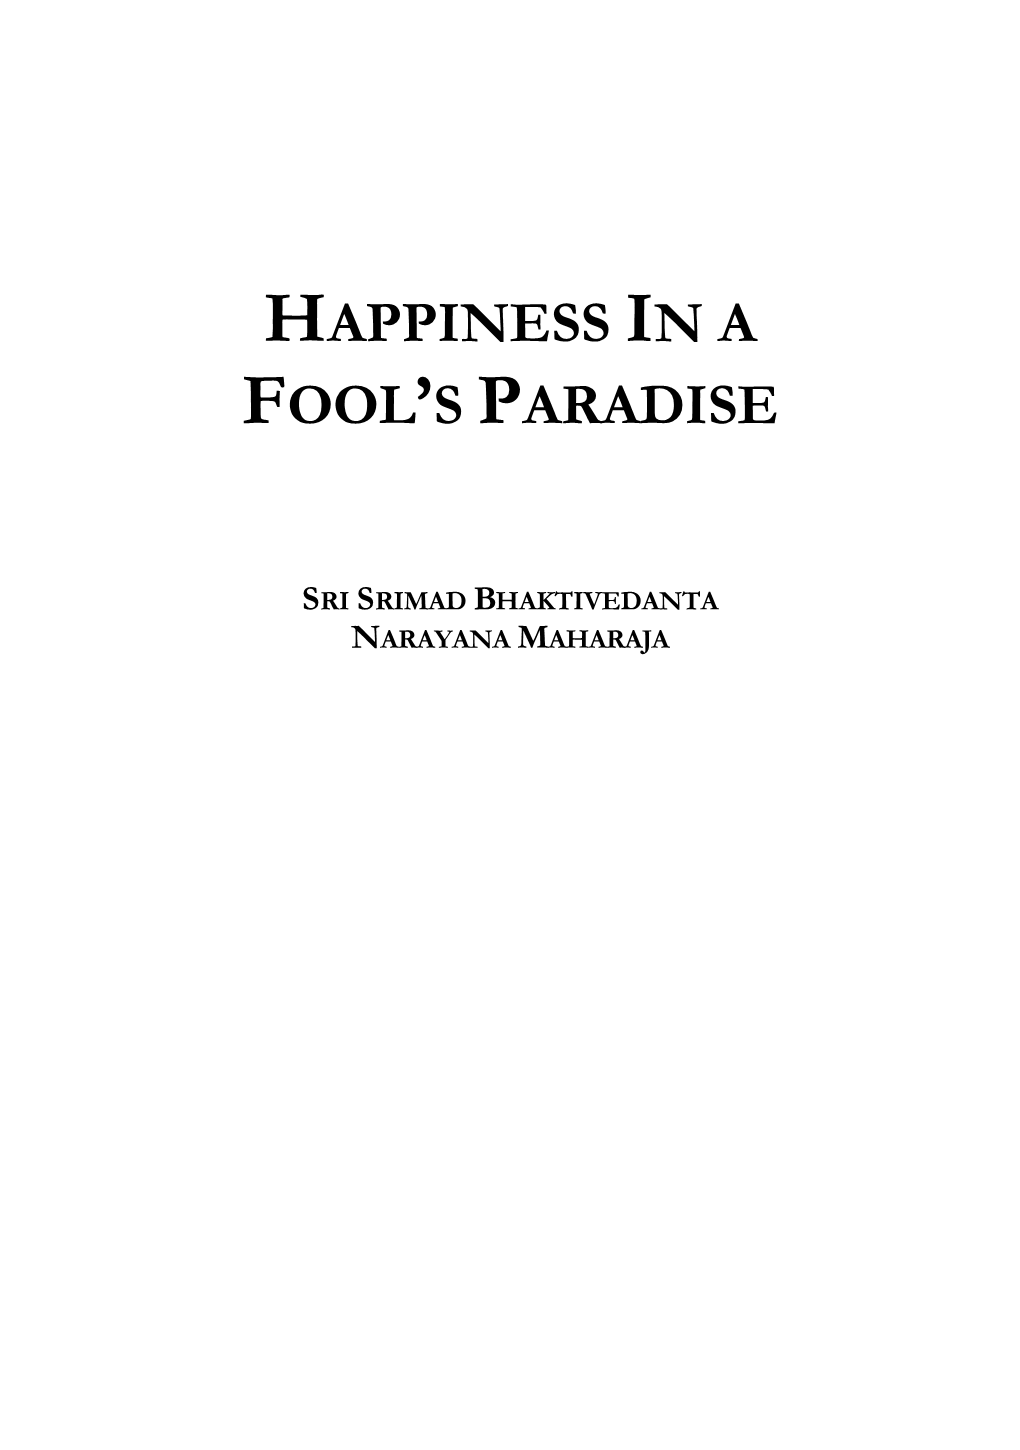 Happiness in a Fool's Paradise